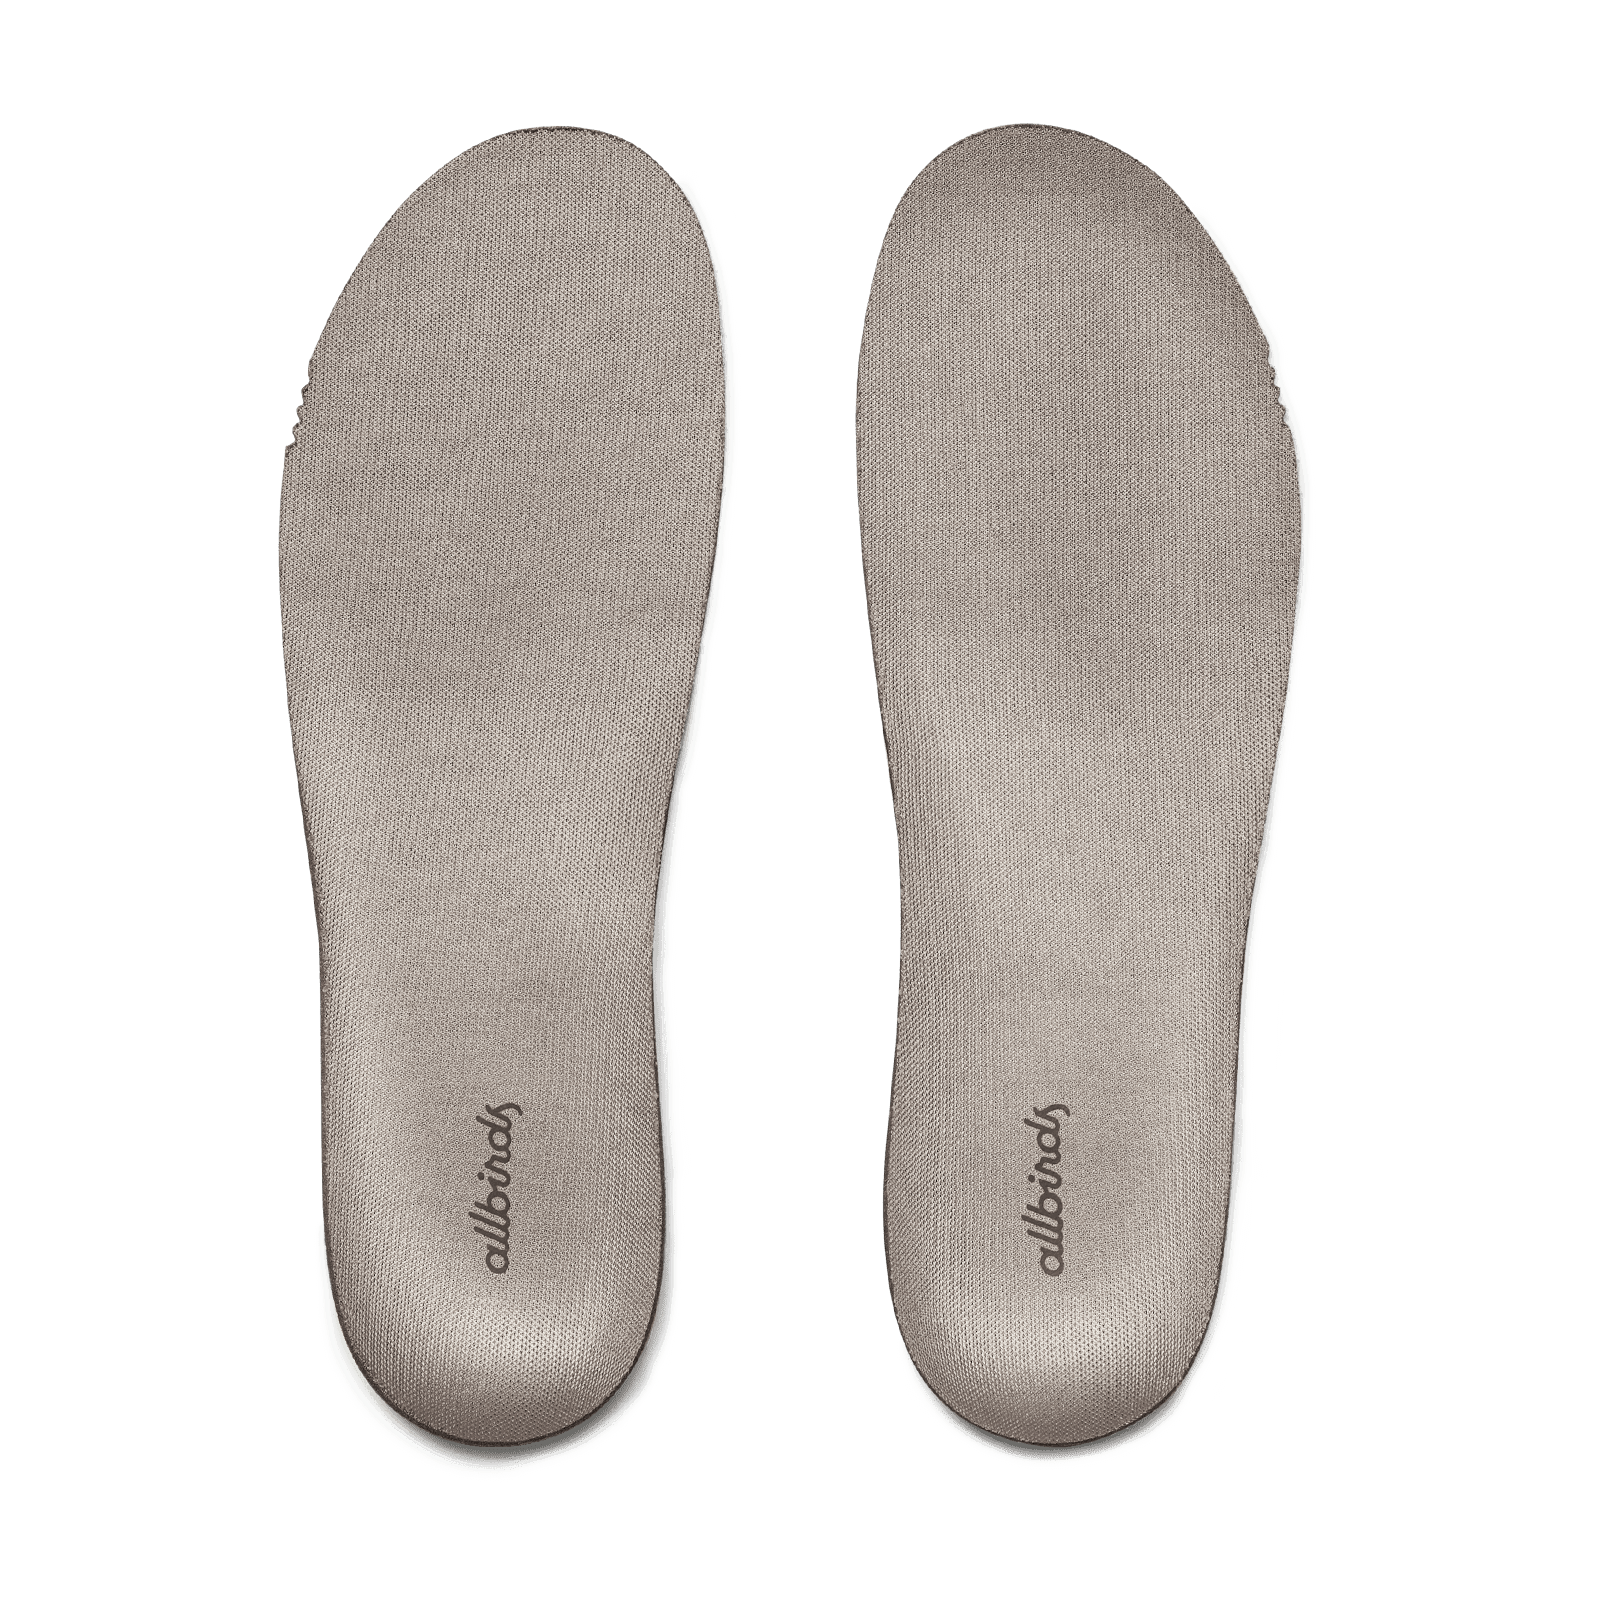 Allbirds FY20 PDP Dasher Insole TOP